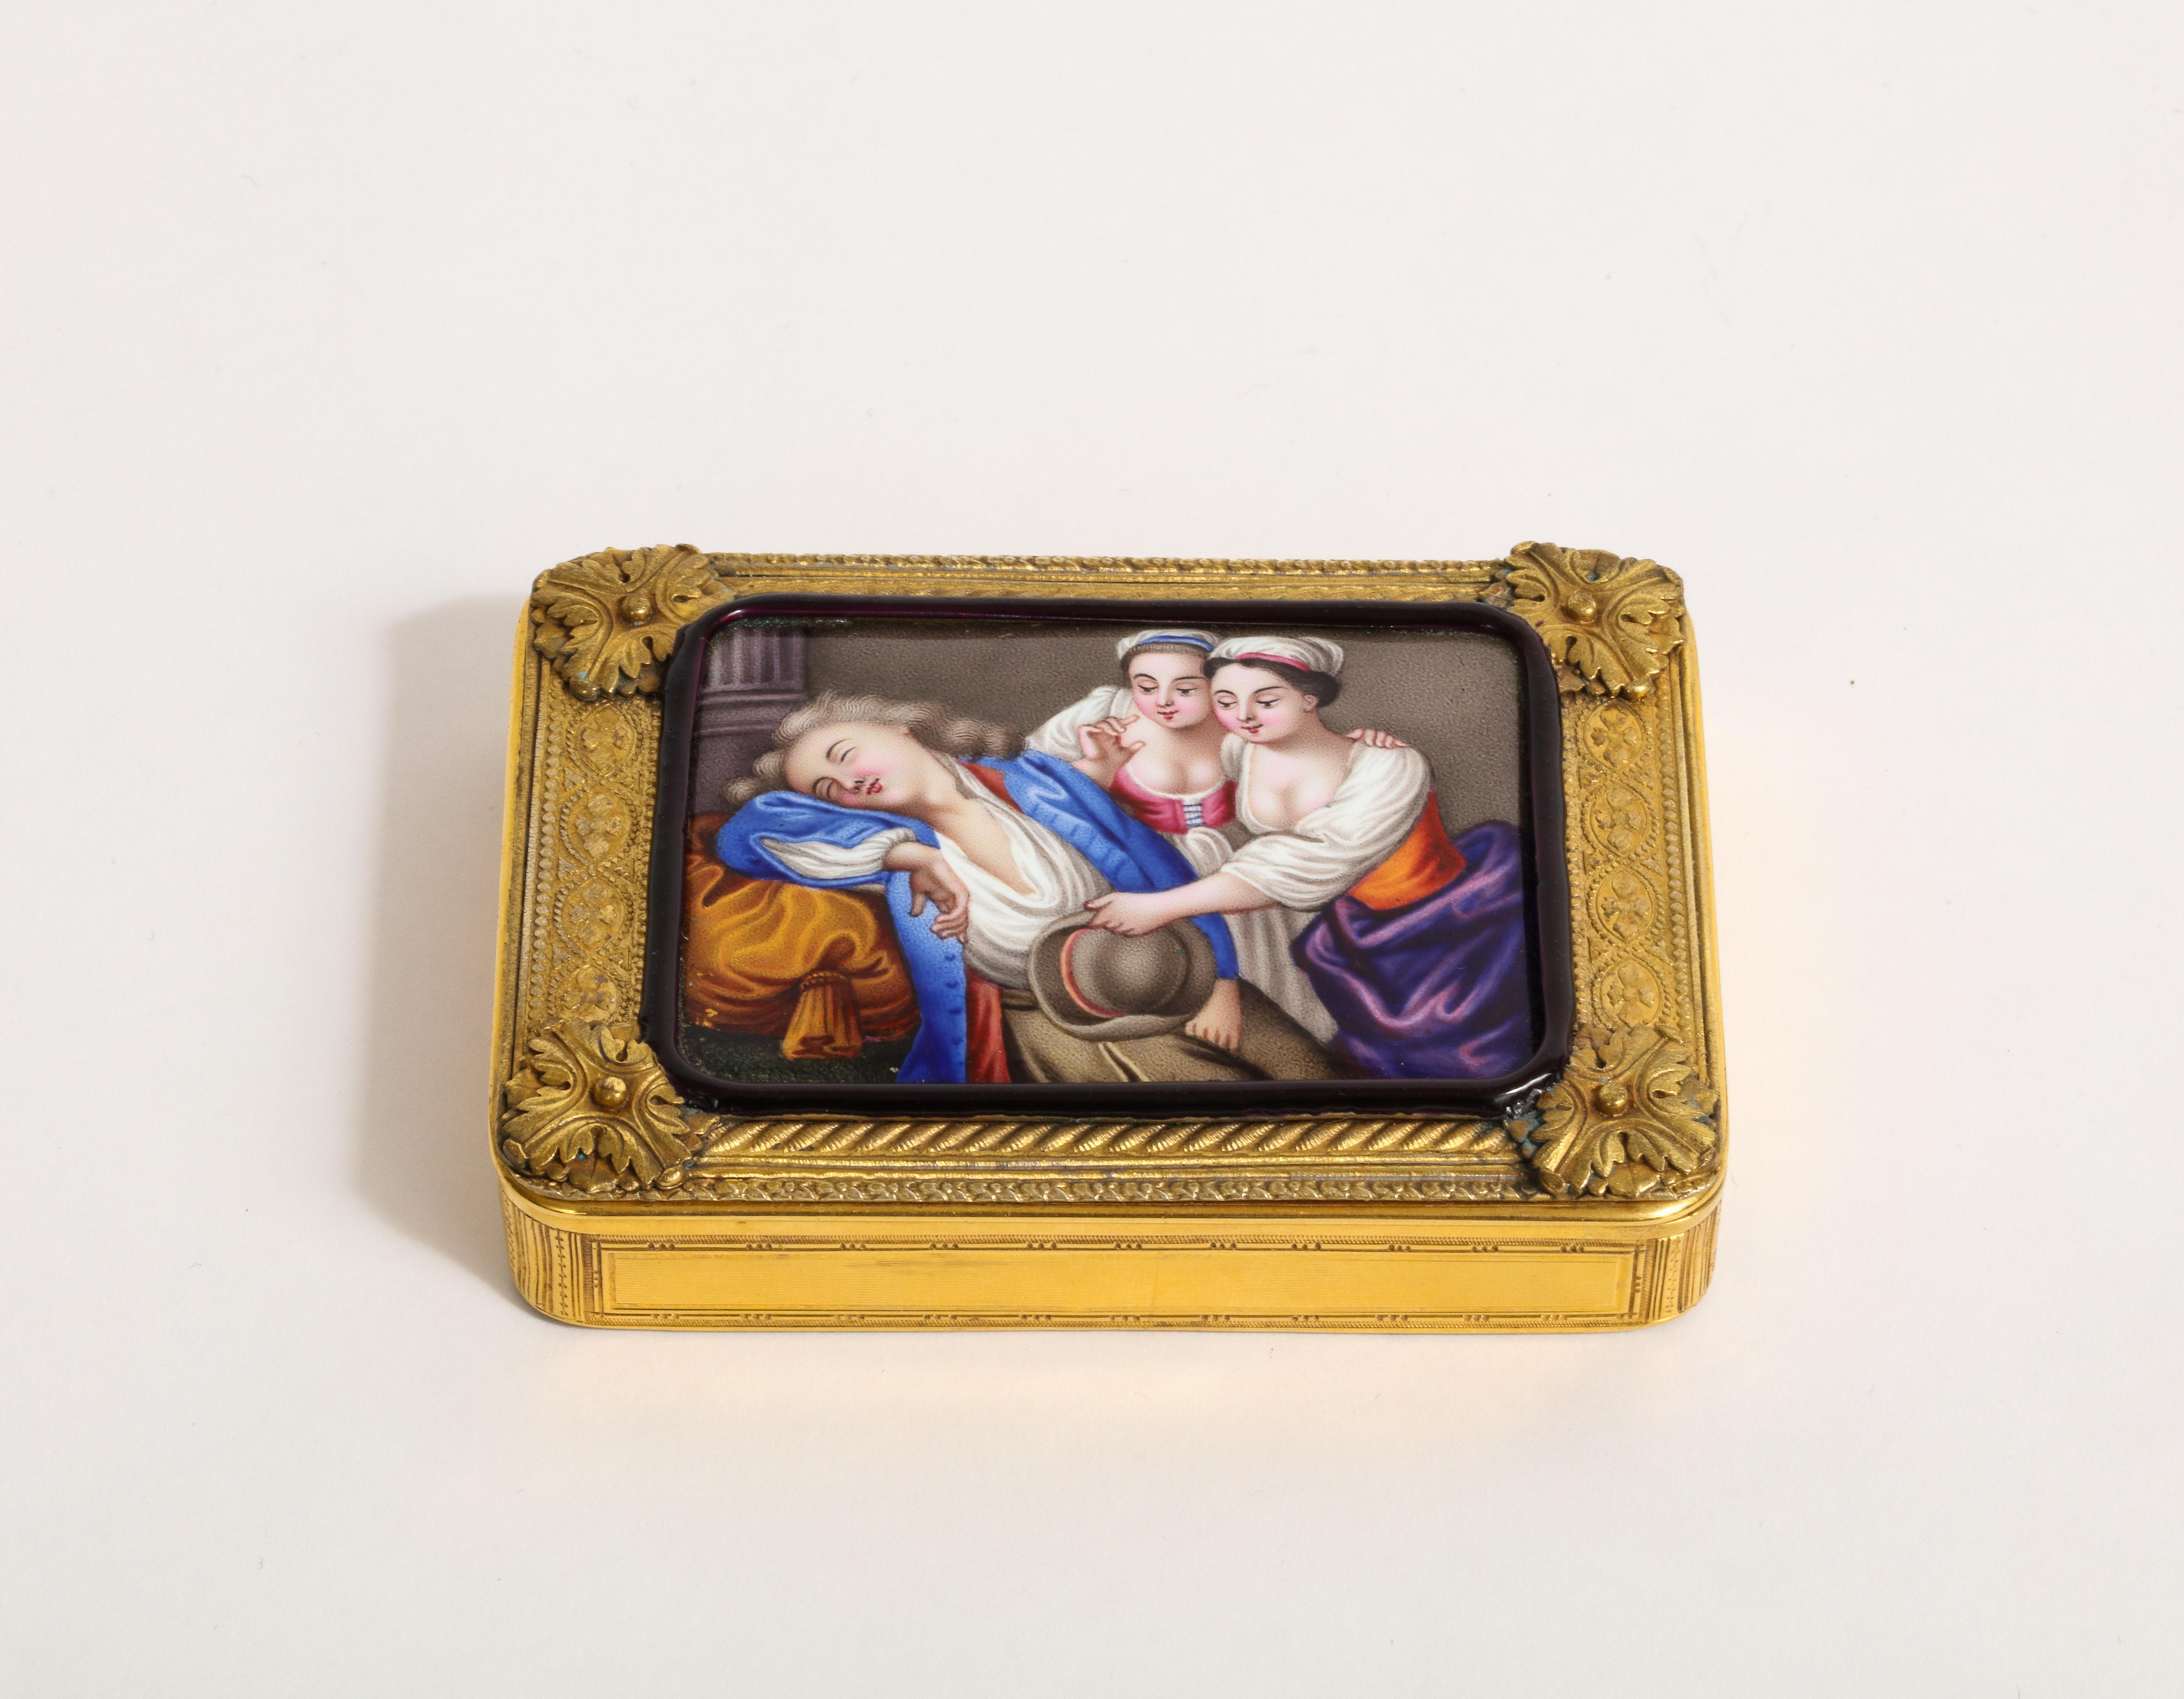 Gold & enamel snuff box

Circa 19th century, European 

Weight: 132.8 grams

Dimensions: Approximately 3.25 in x 0.44 in x 2.25 in.